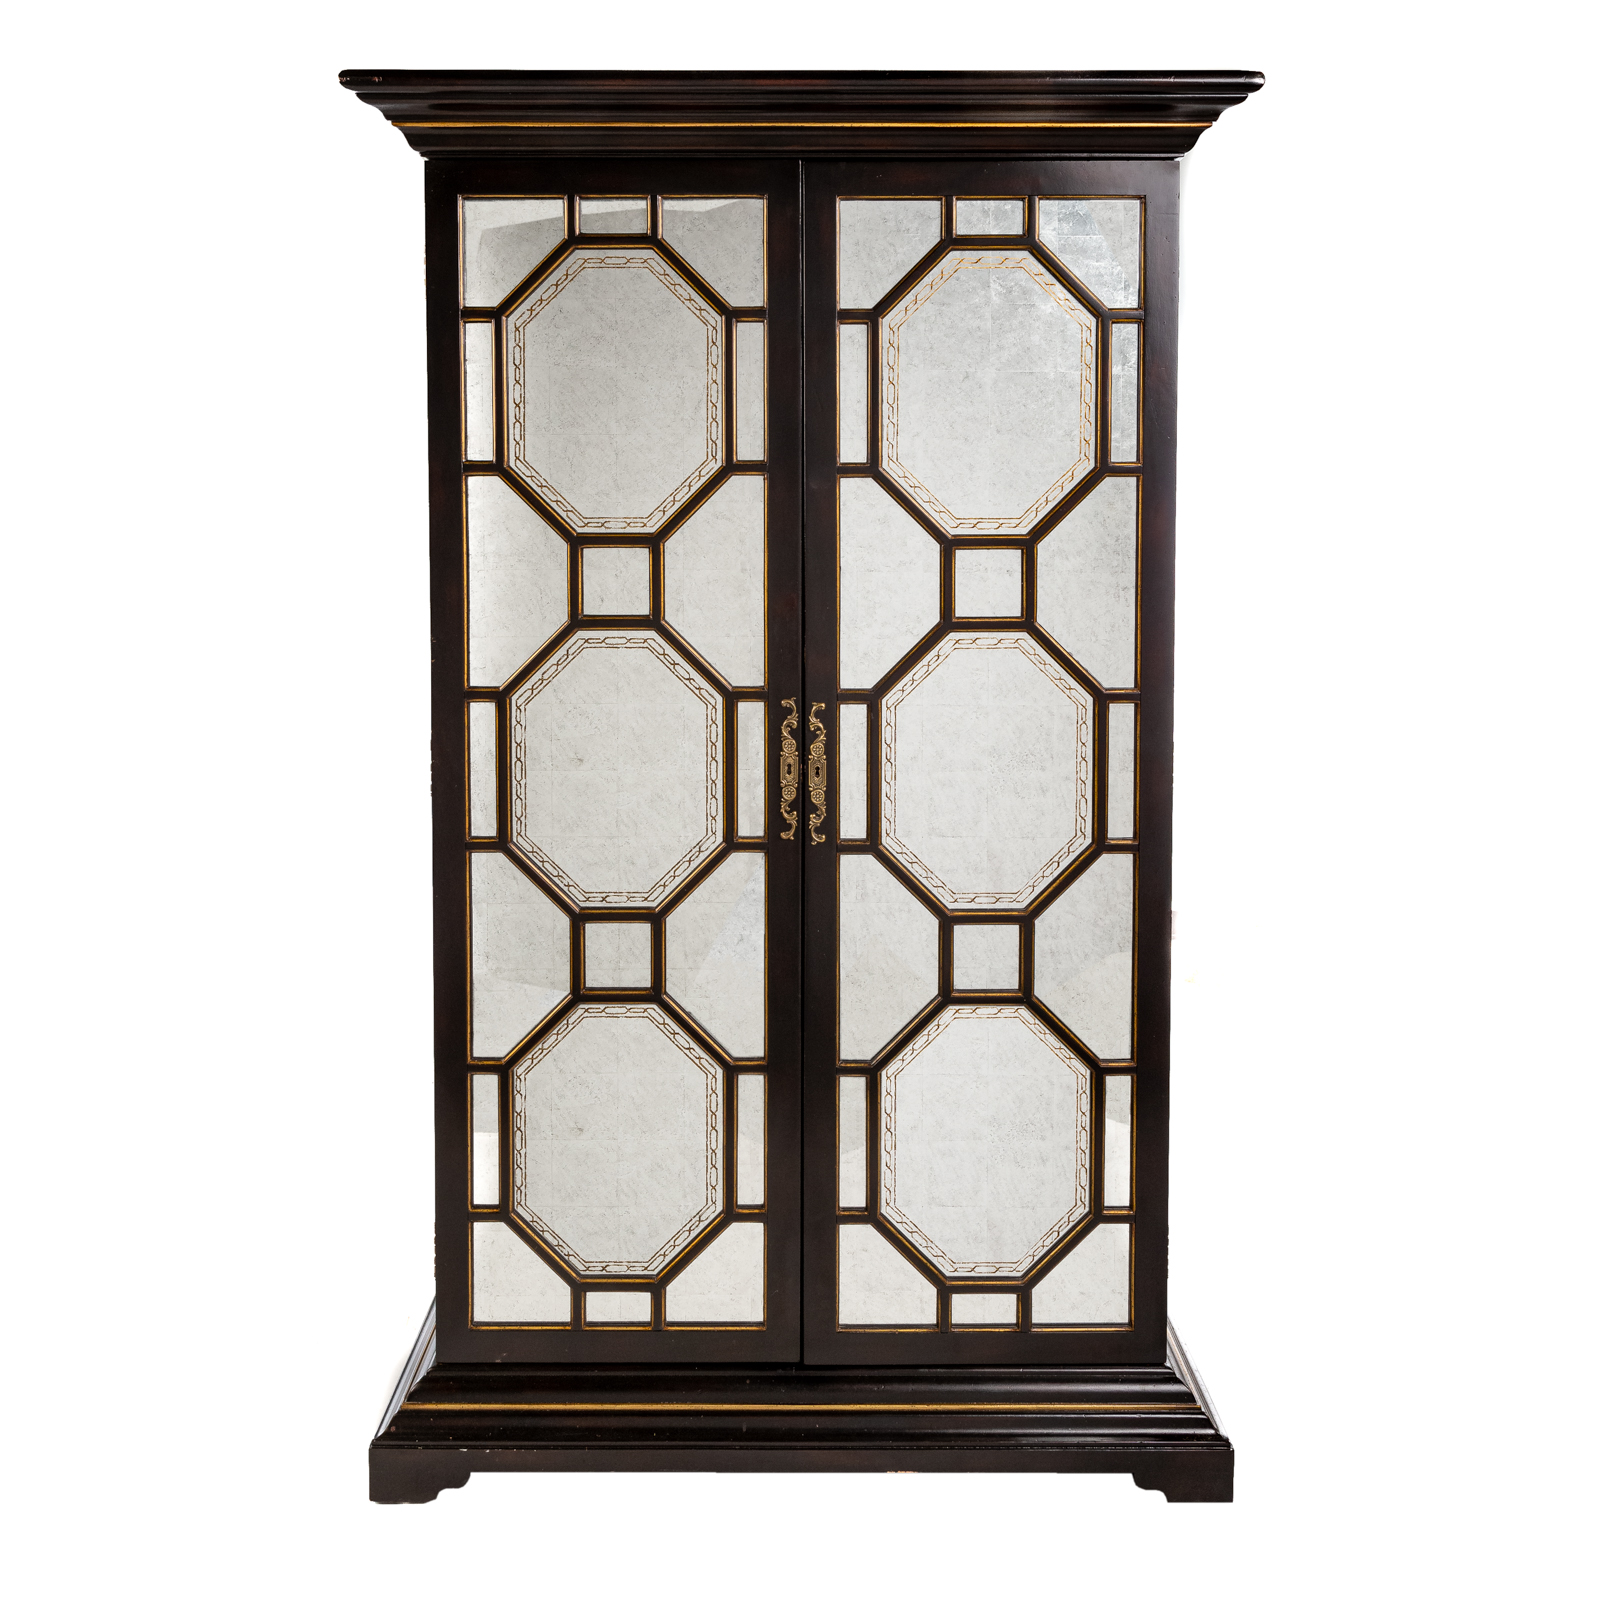 CHIPPENDALE STYLE EBONIZED & MIRRORED